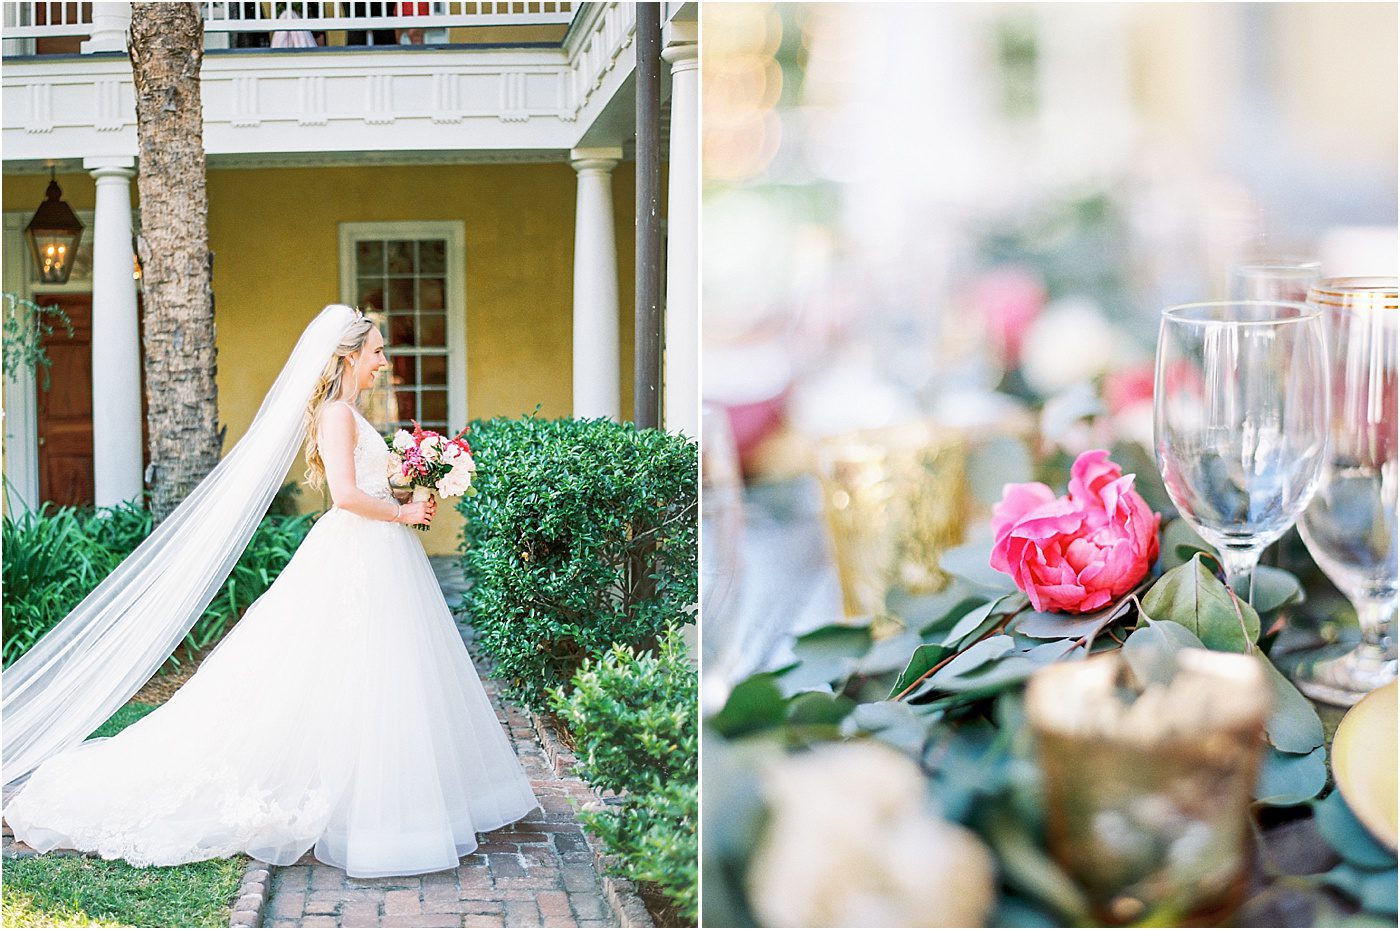 William Aiken House Wedding in the Spring with Bright Color Scheme | Charleston Wedding Photographer | Catherine Ann Photography